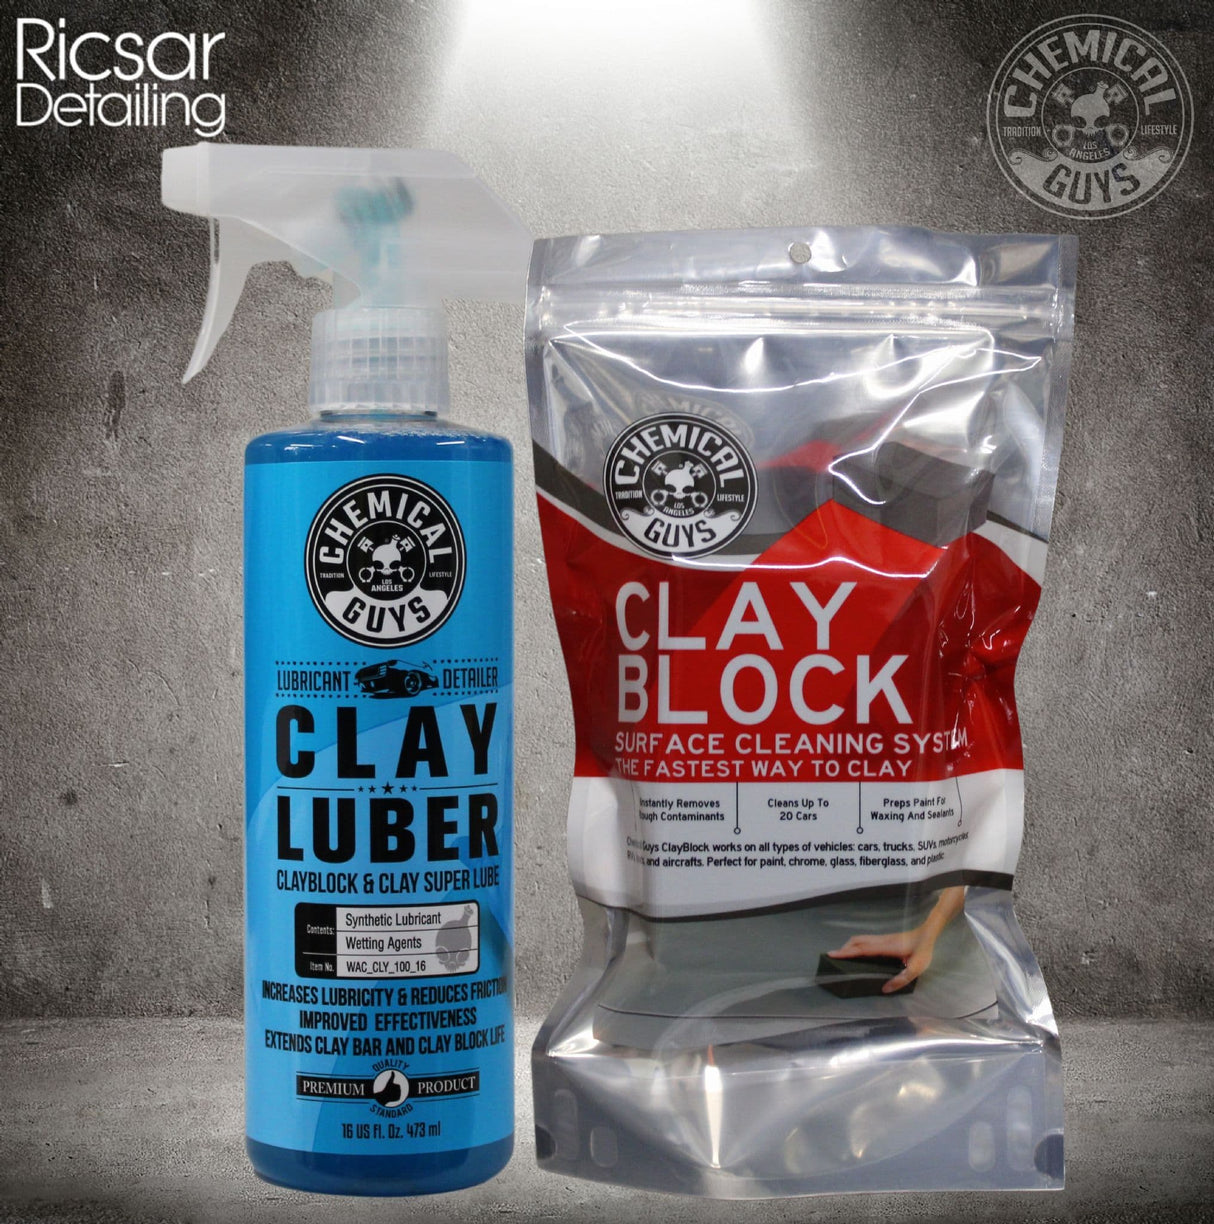 Chemical Guys - Complete Clay System